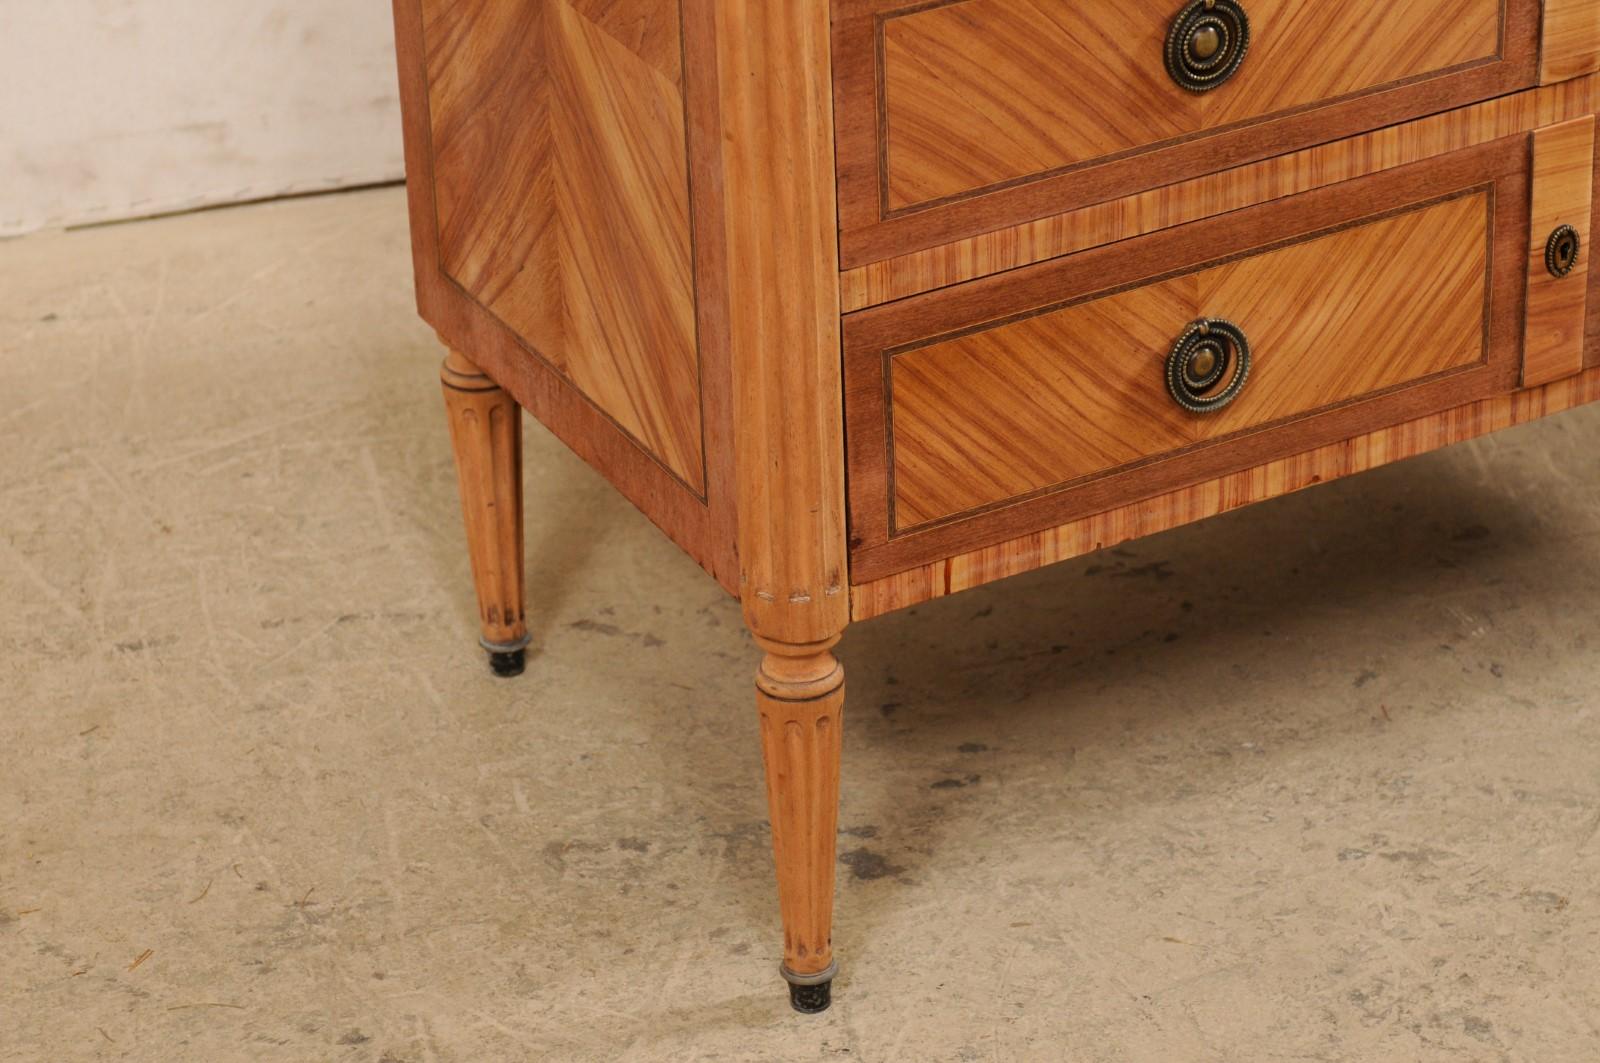 Wood French Commode with Stone Top and Lovely Inlay Pattern Creating Visual Interest